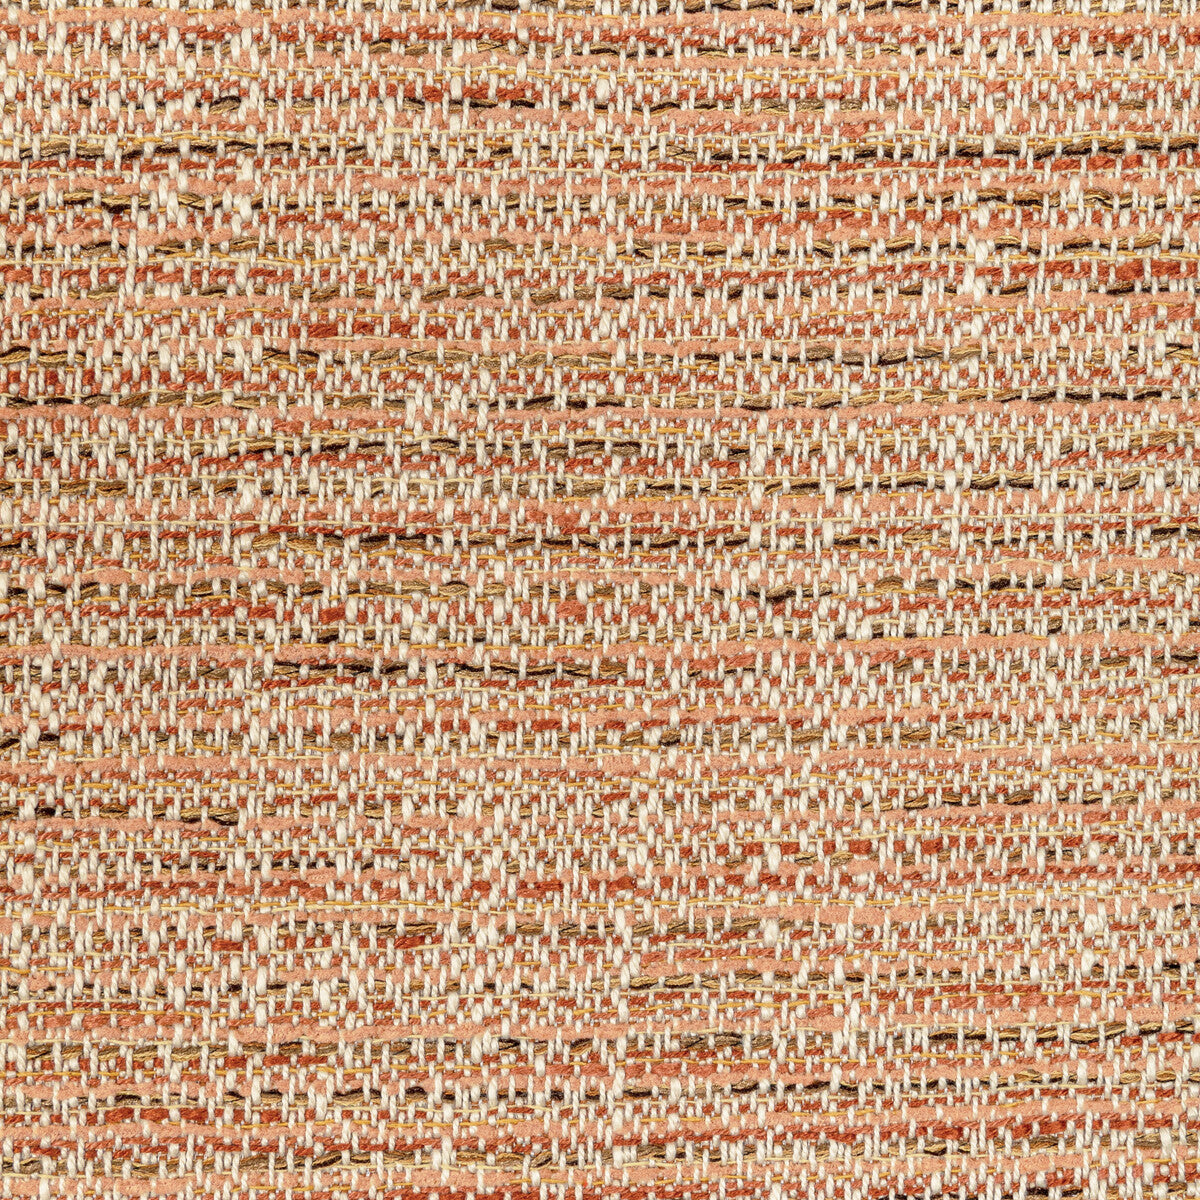 Kravet Design fabric in 36406-124 color - pattern 36406.124.0 - by Kravet Design in the Performance Crypton Home collection